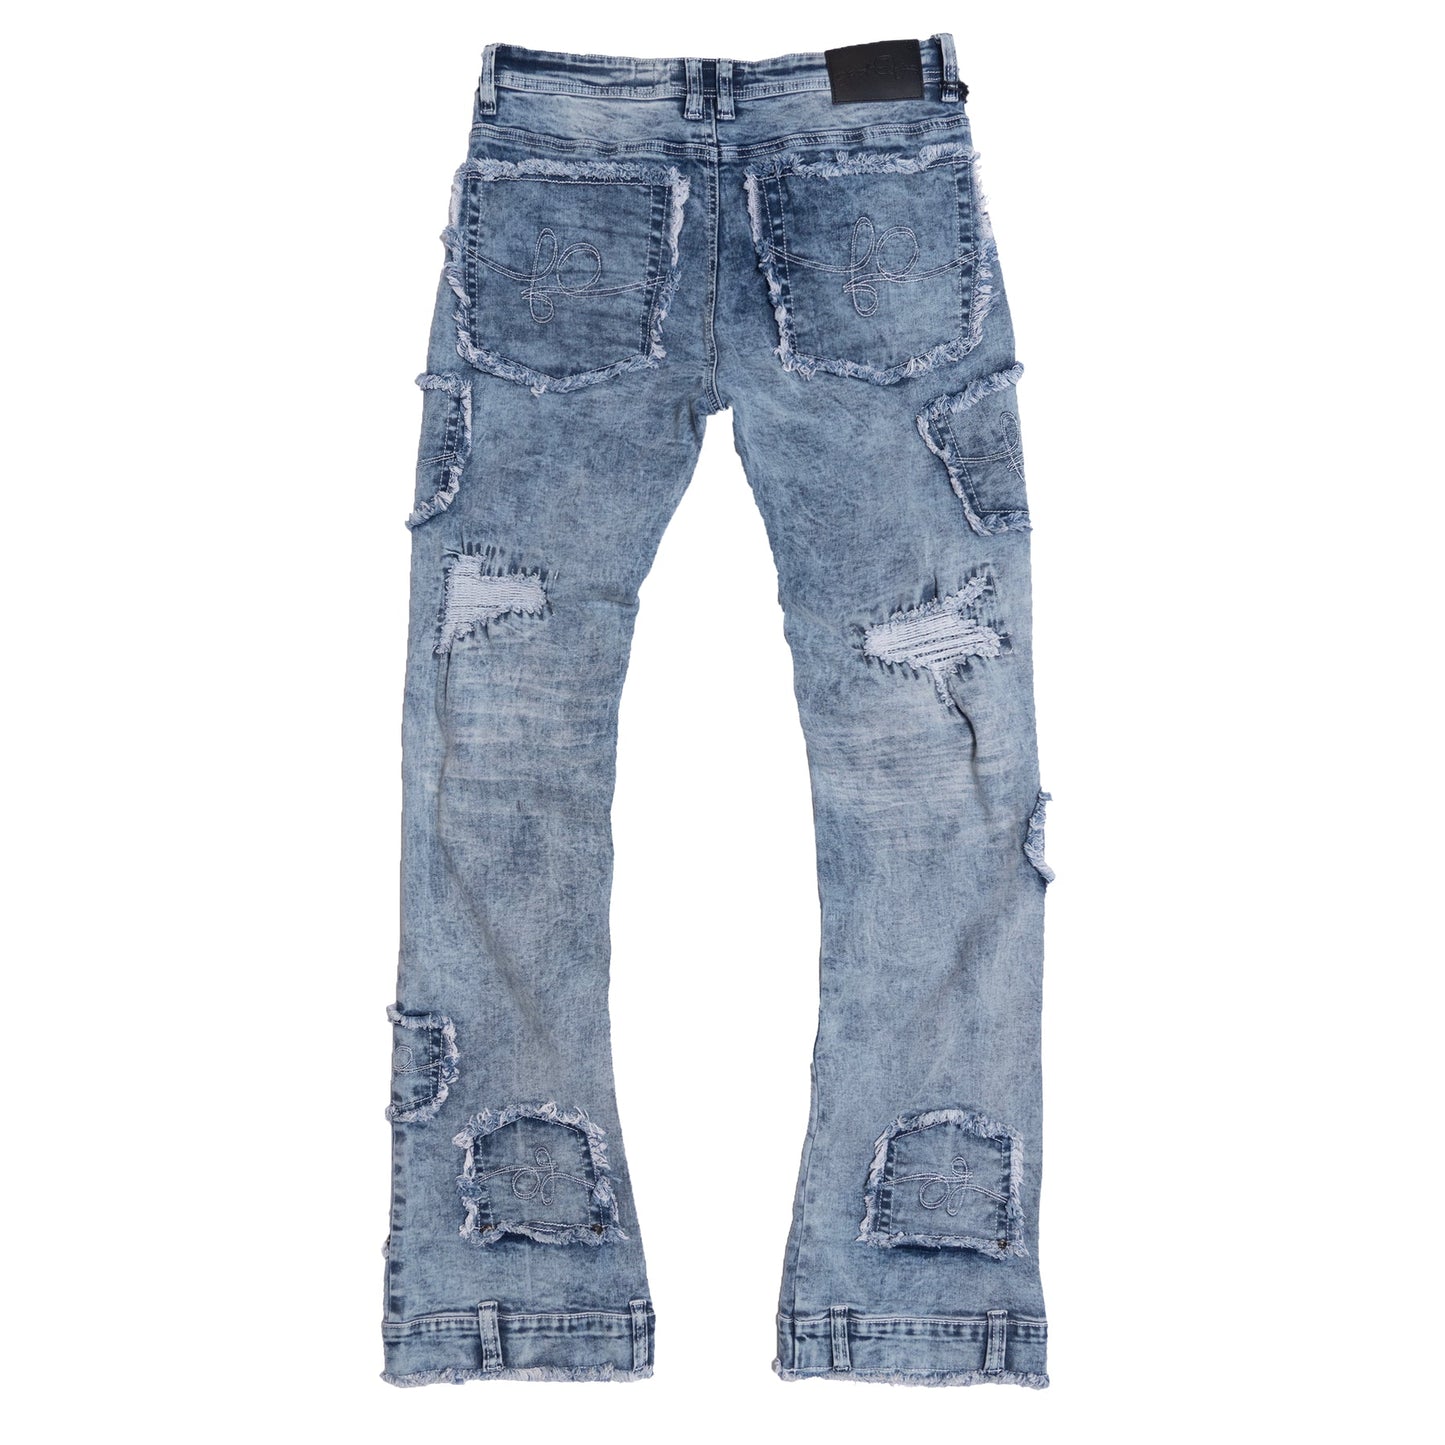 Frost F1721 Rackade Stacked Jeans - Light Wash